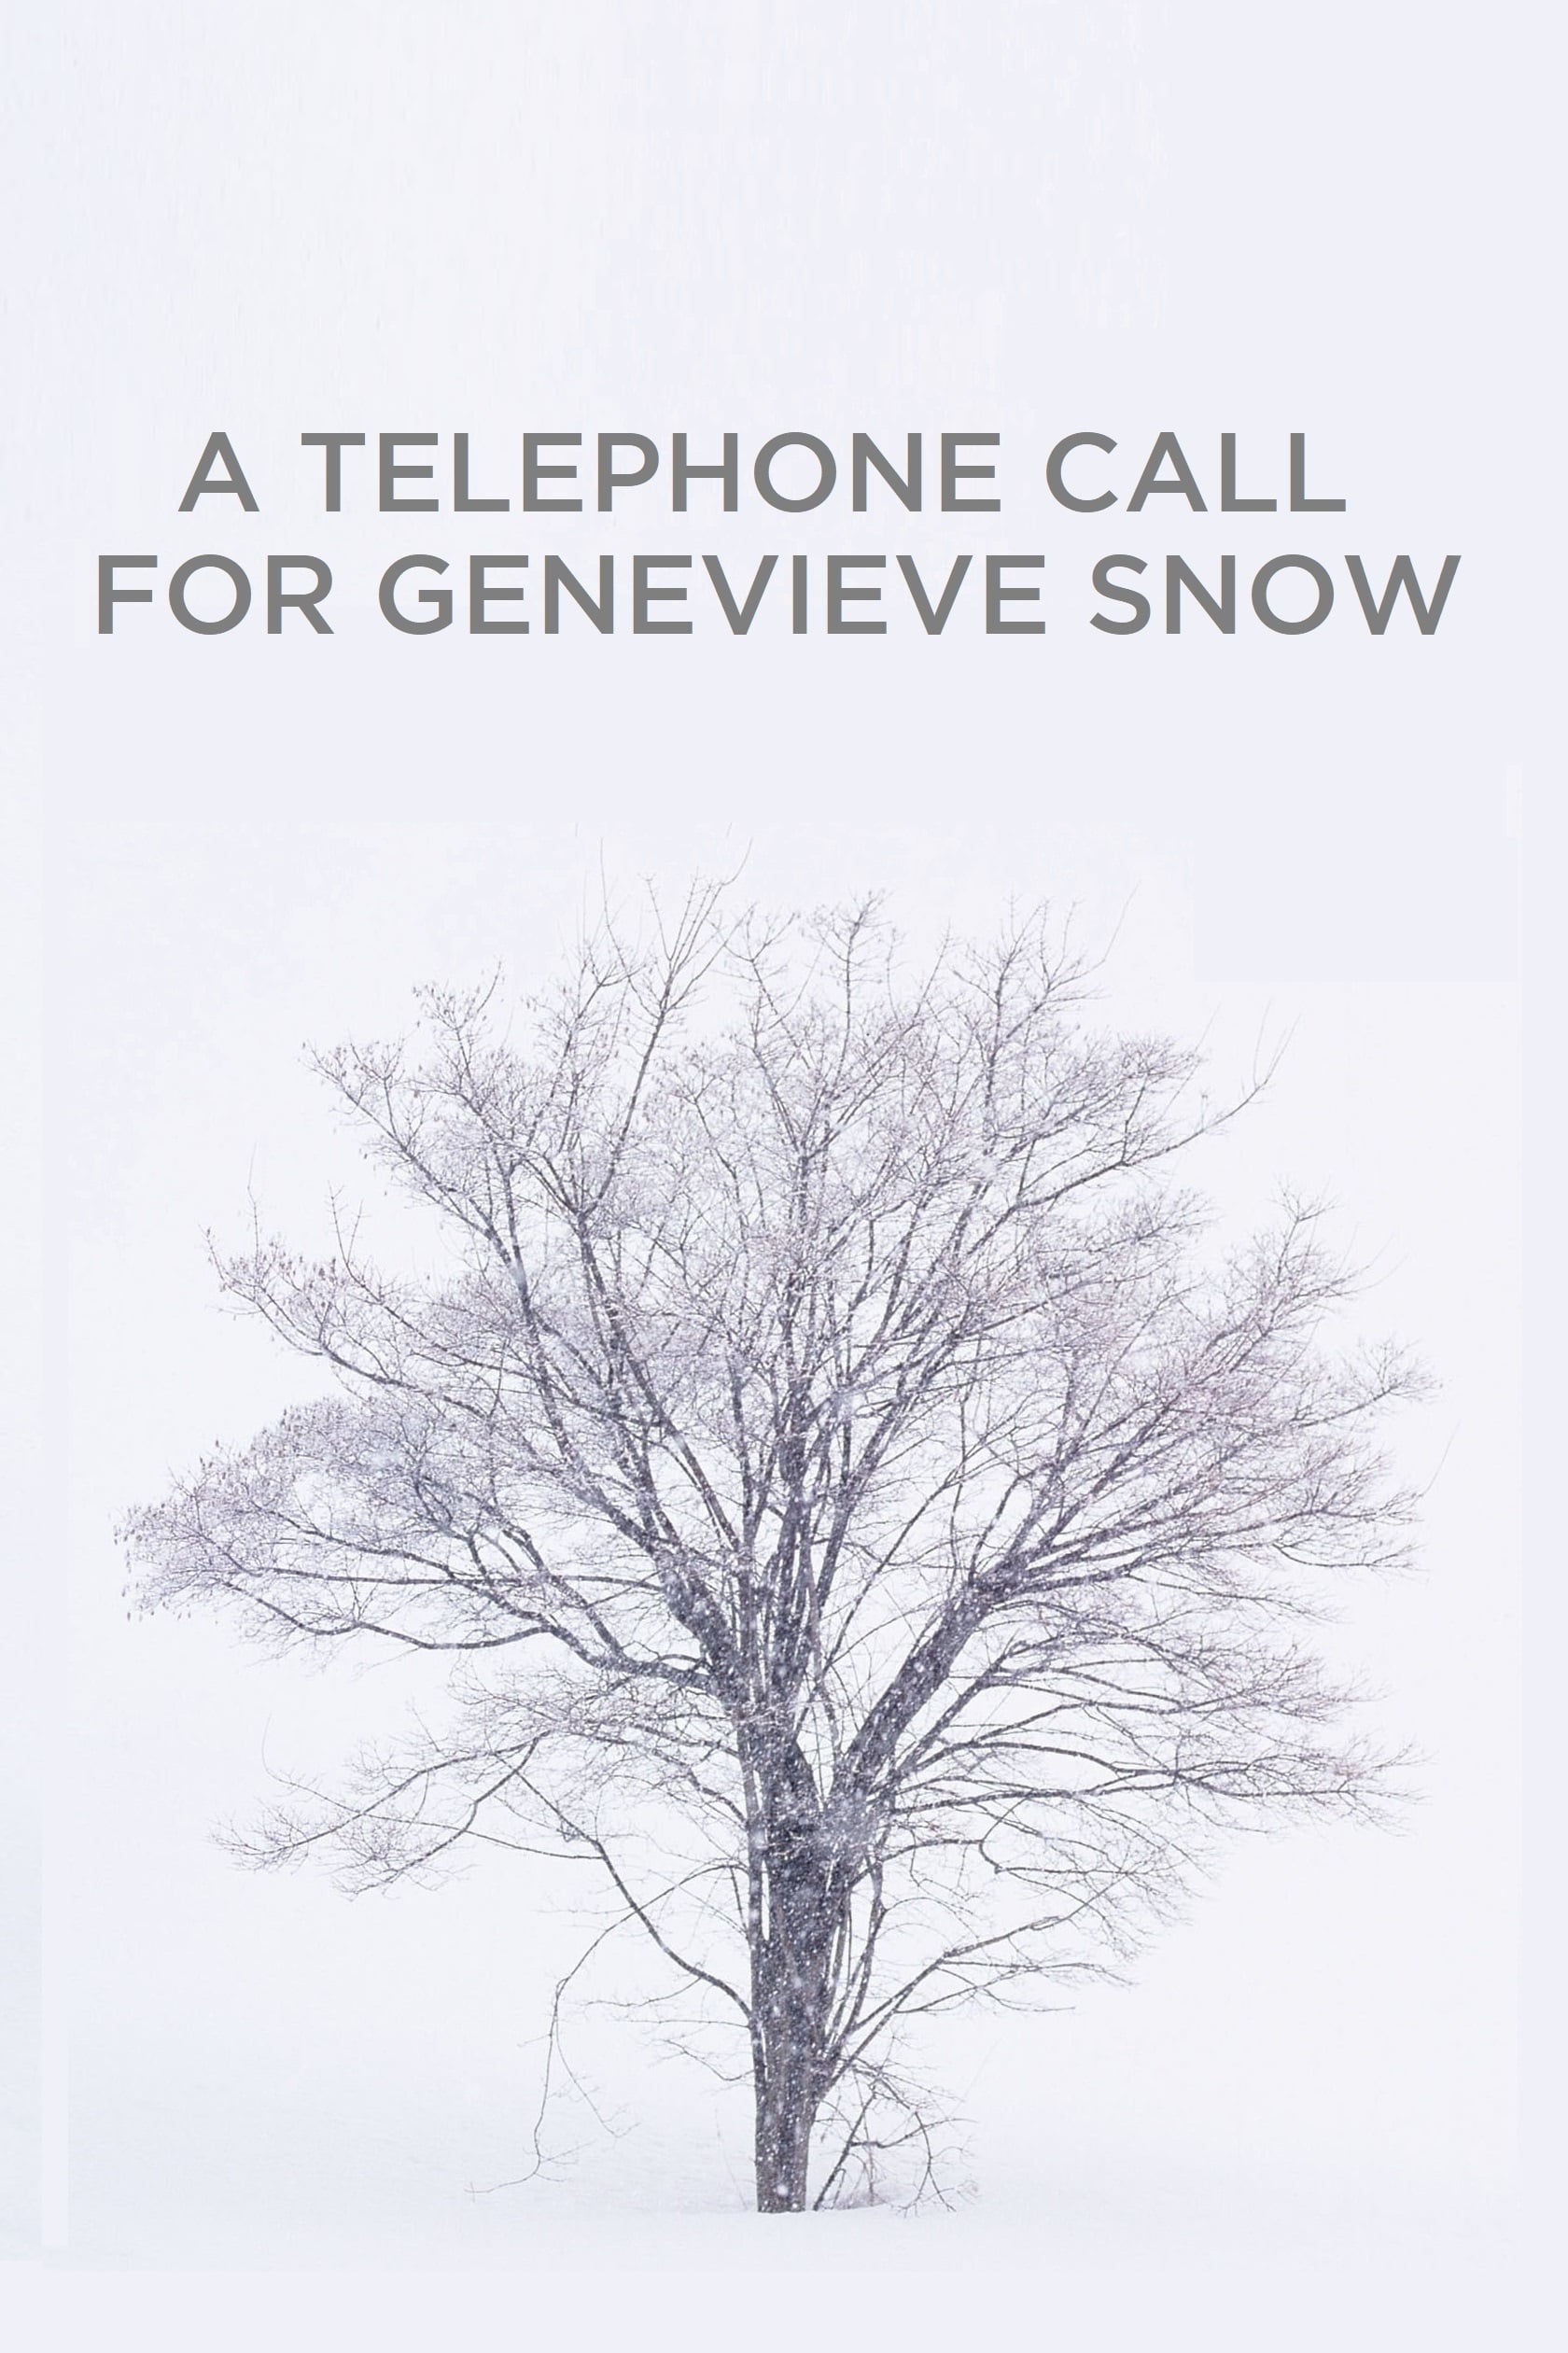 A Telephone Call for Genevieve Snow